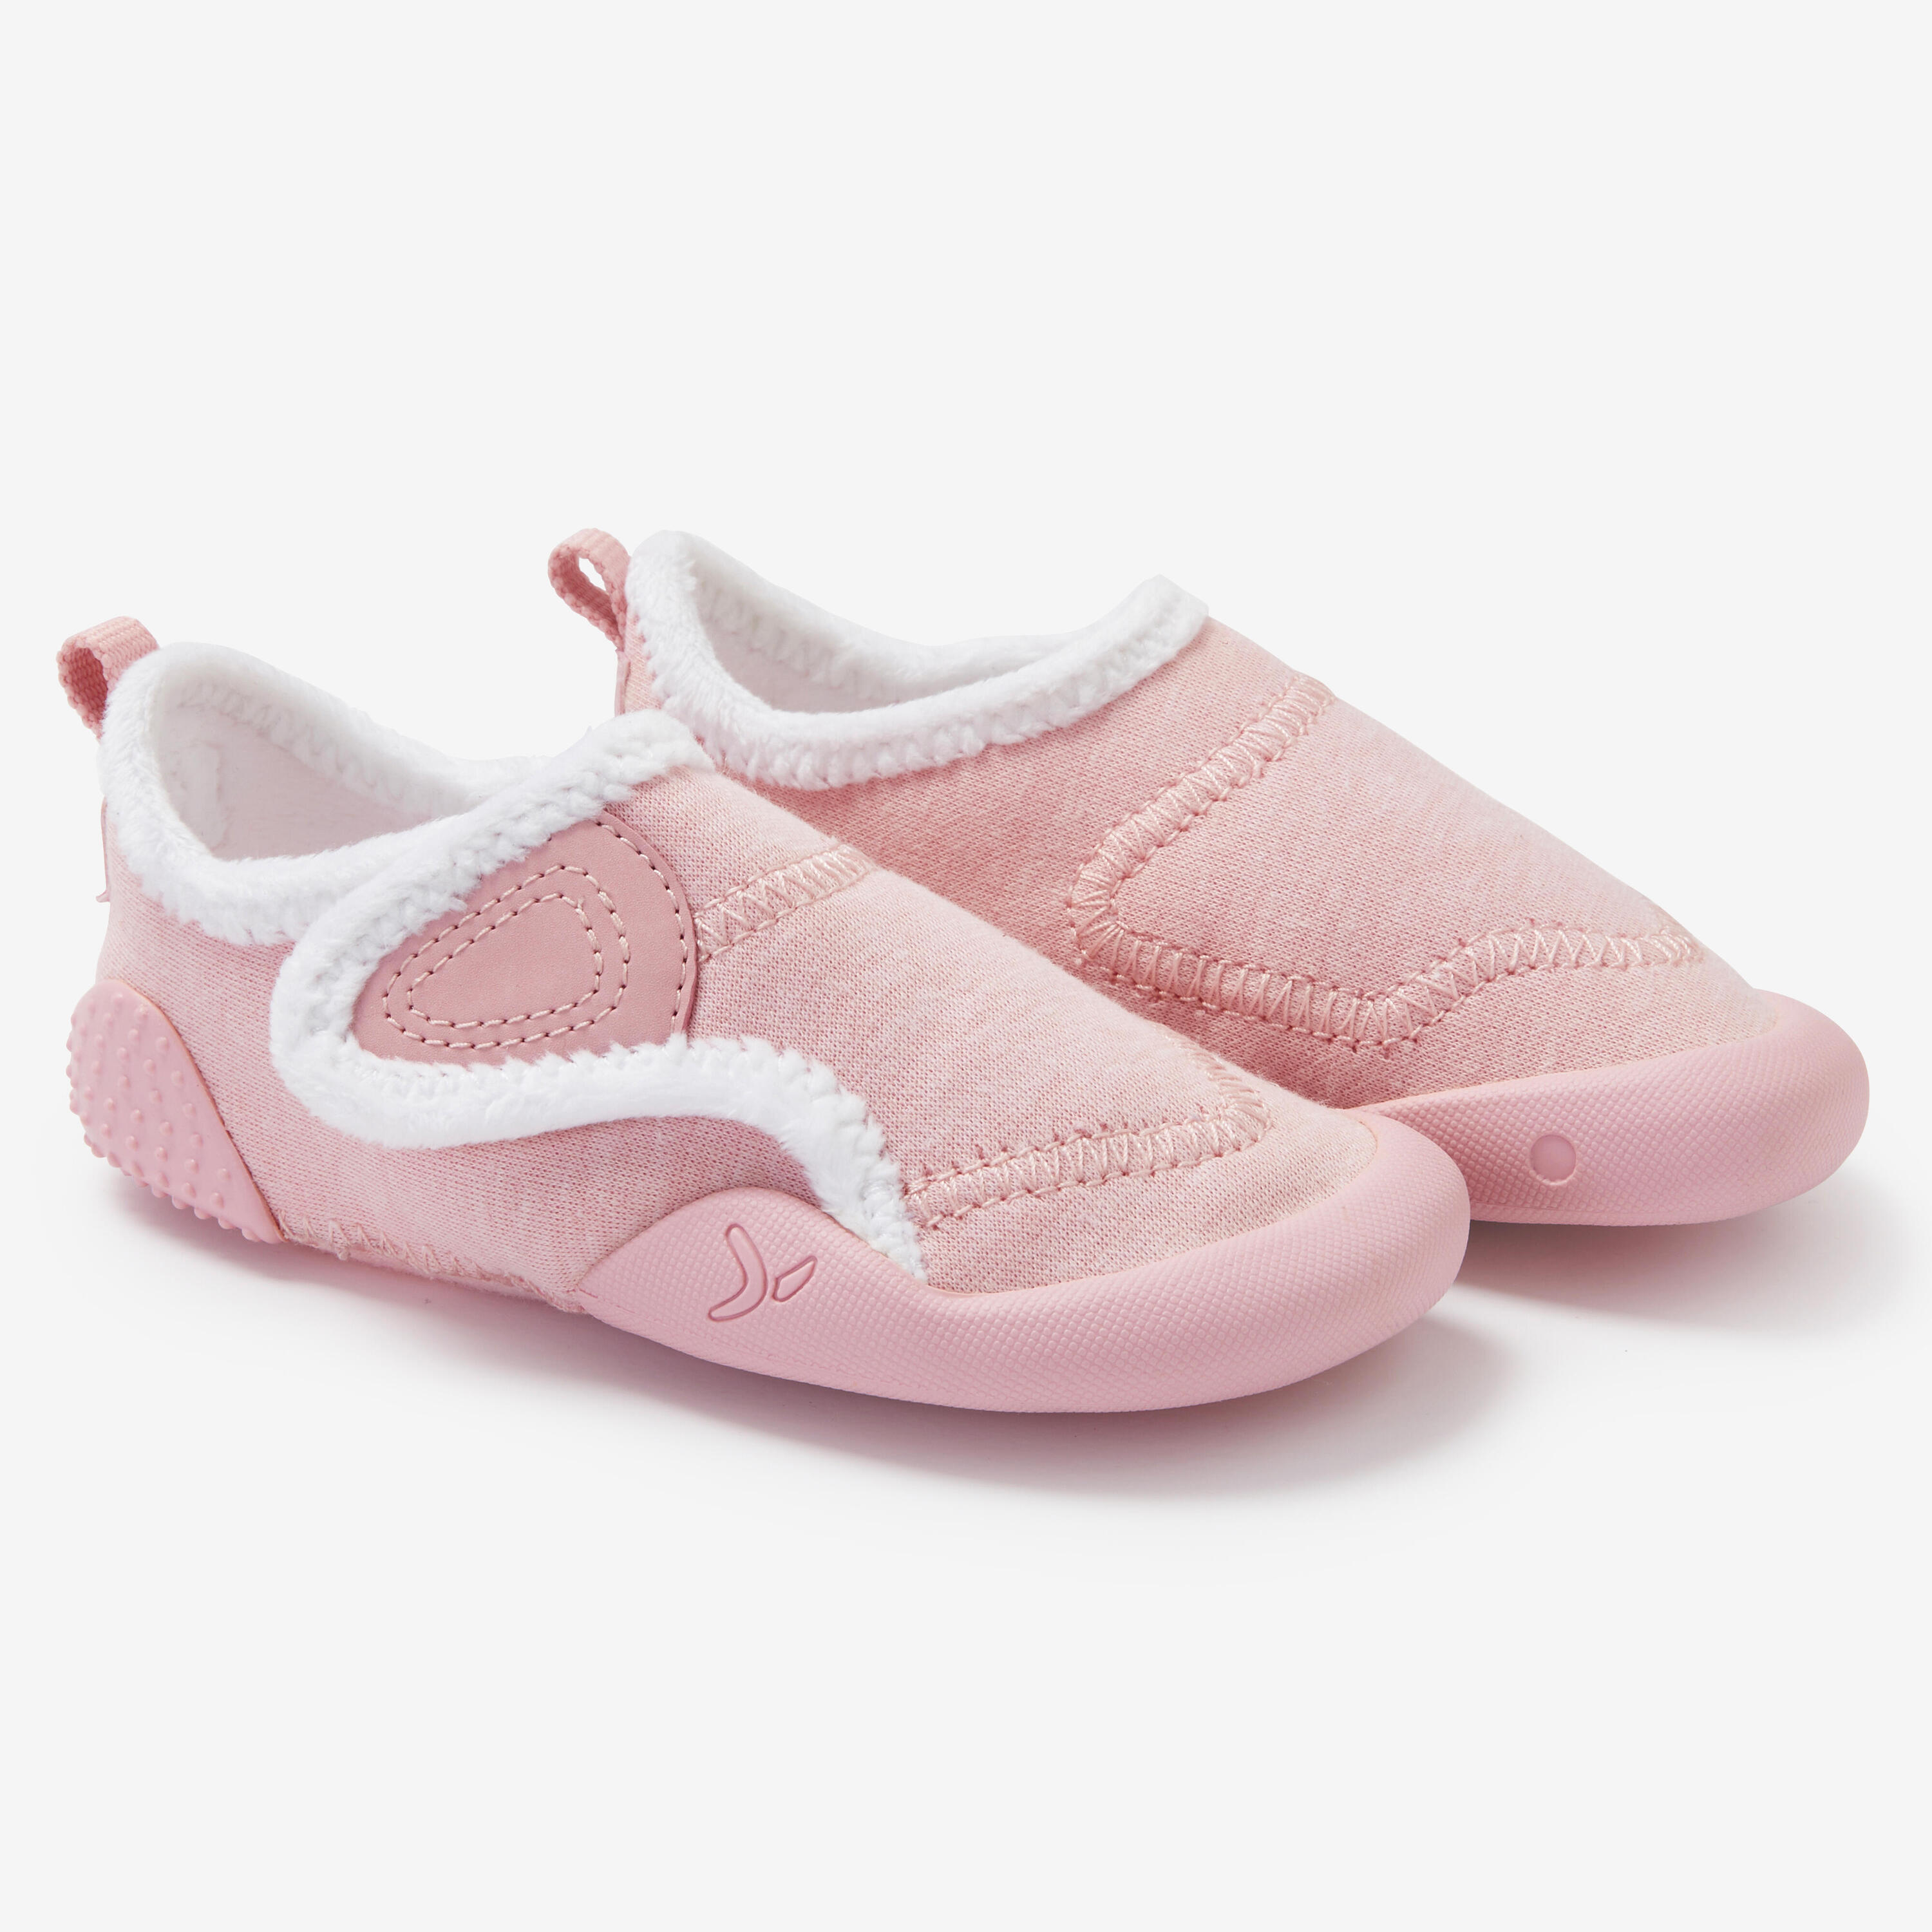 Kids' Comfortable Bootee 550 Babylight - Pink 6/7